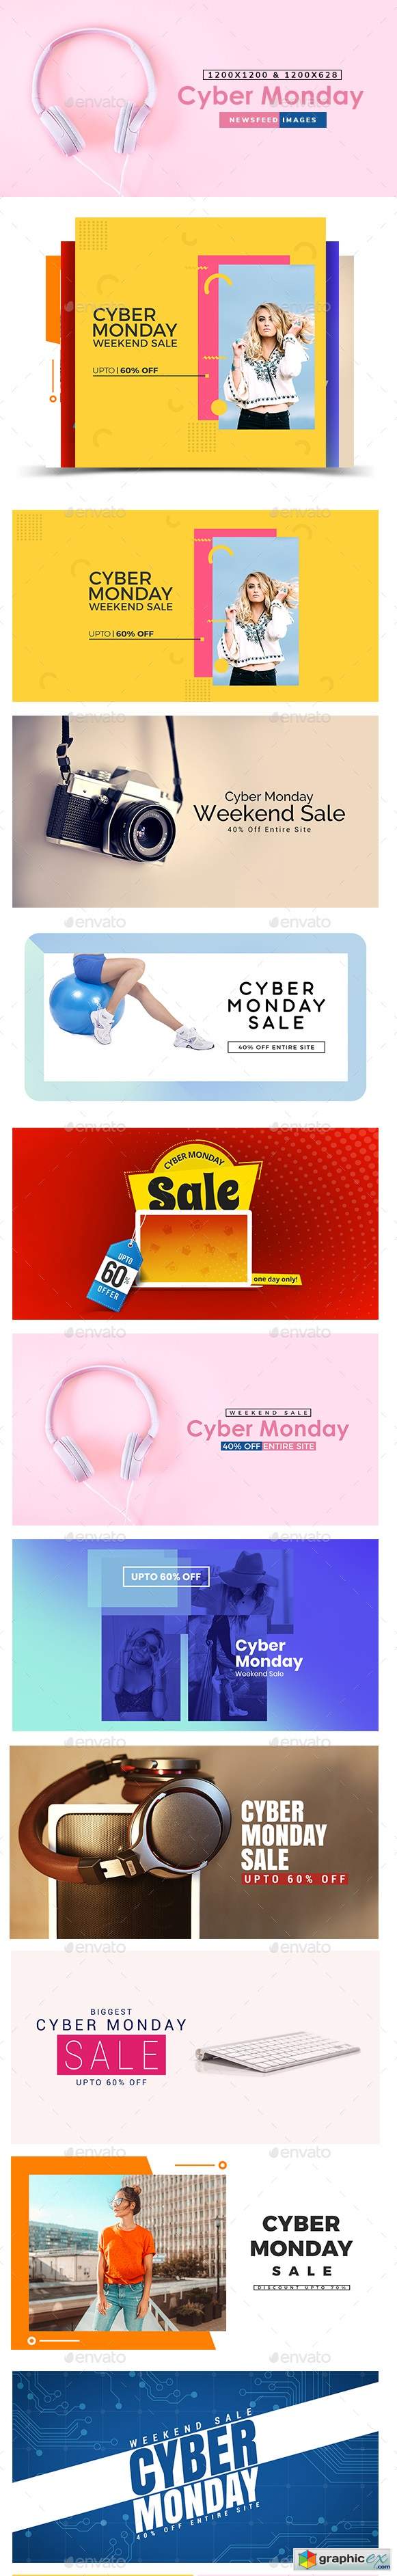 Cyber Monday Sale Facebook and Instagram Newsfeed Banners - 10 Designs